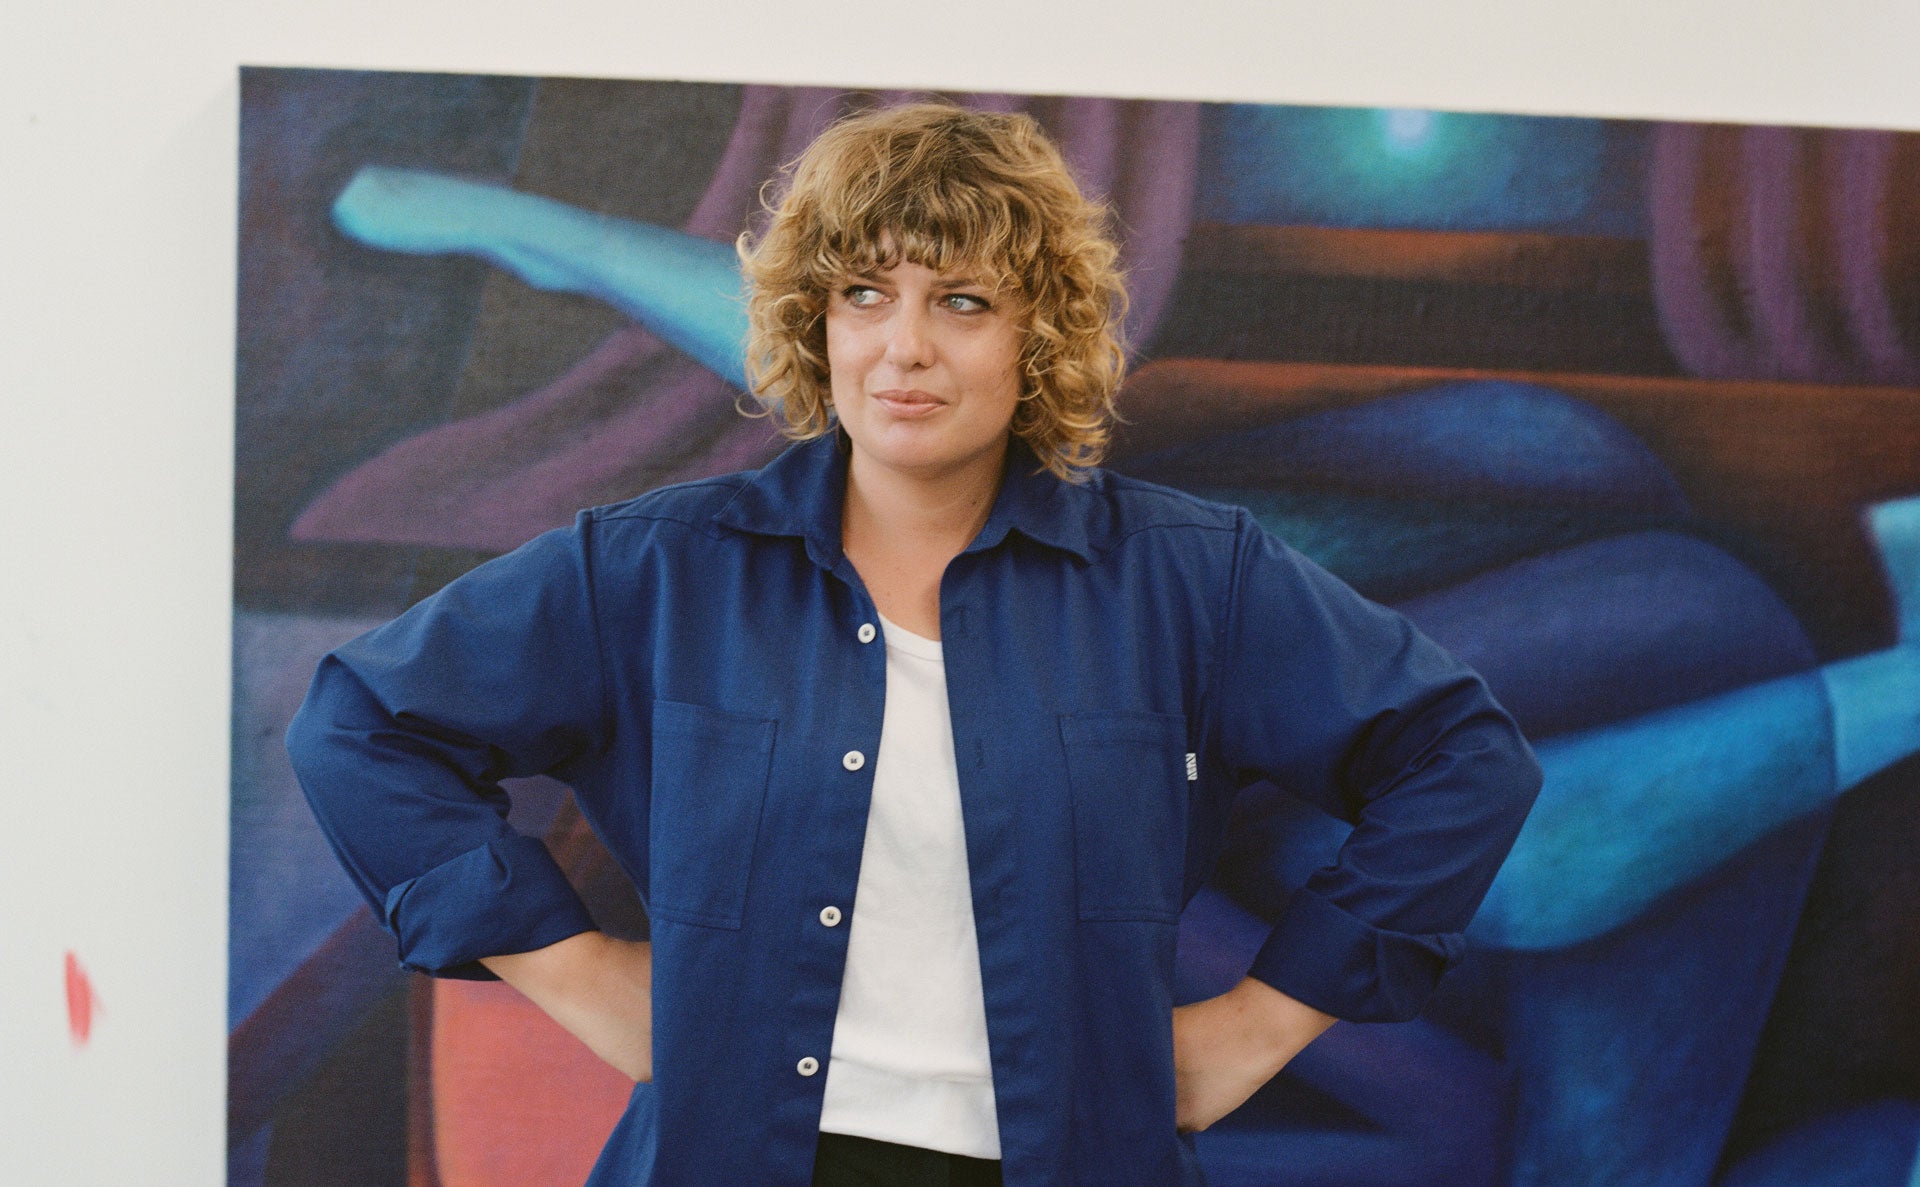 Imogen taylor wearing an M.N Uniform navy blue shirt standing in front of a large painting